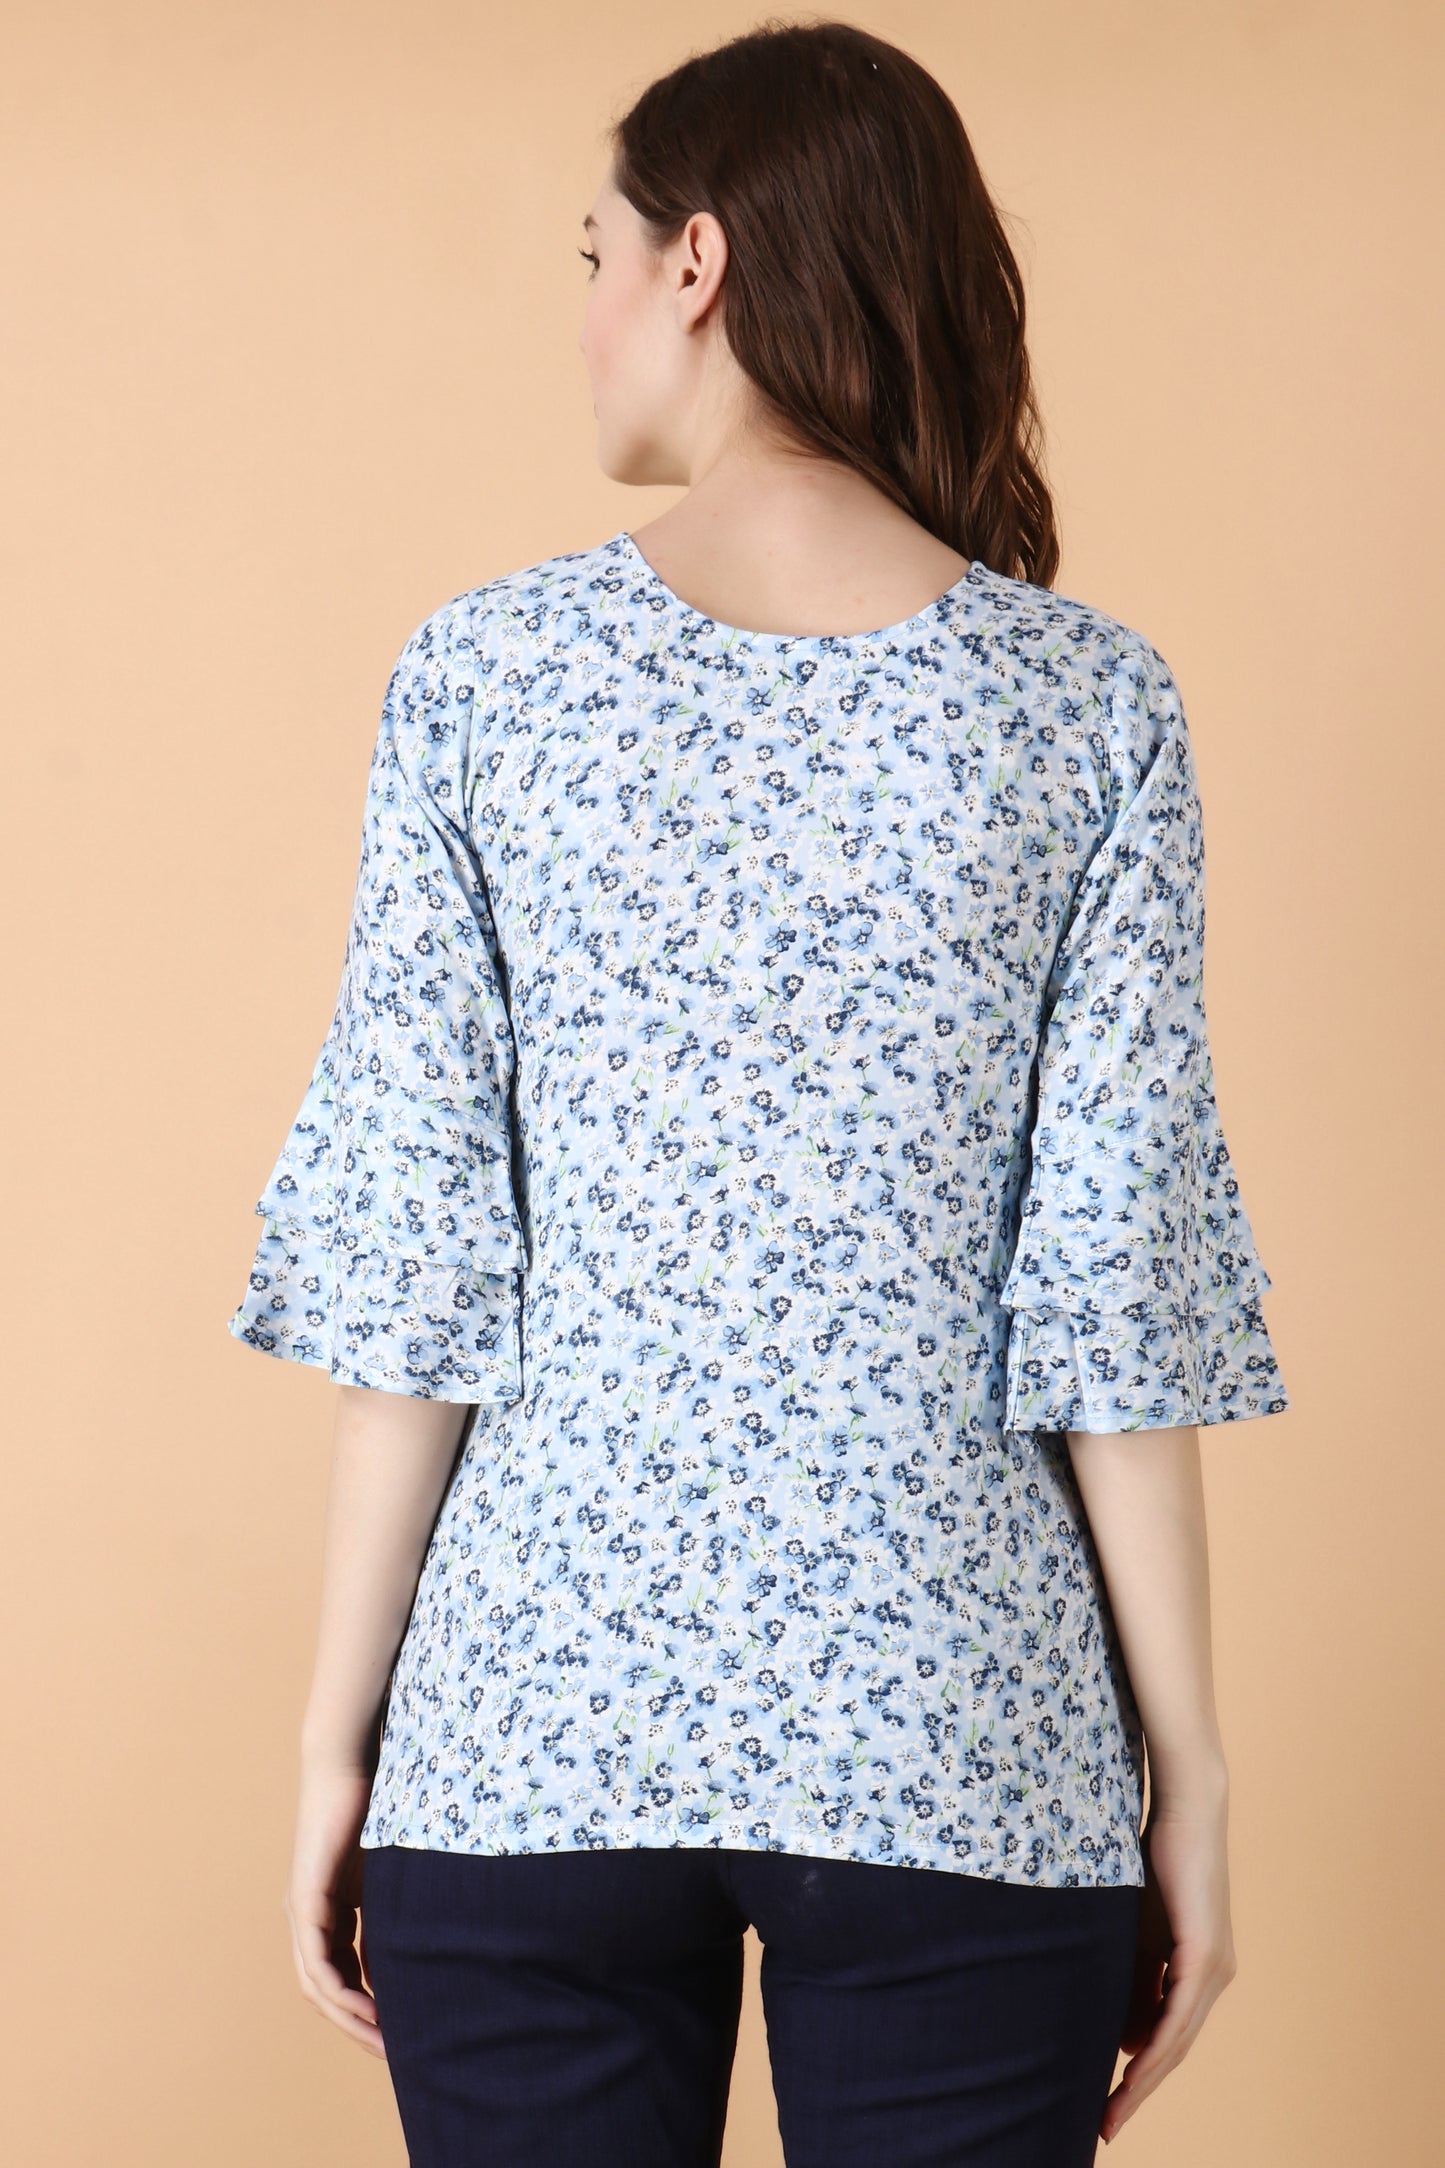 10XL, 2XL, 3XL, 4XL, 5XL, 6XL, 7XL, 8XL, 9XL, blue, breathable, BREEZY SLEEVES, casual, floral, OFFICE WEAR, plus size, PLUS SIZE TOP, rayon, V-NECK